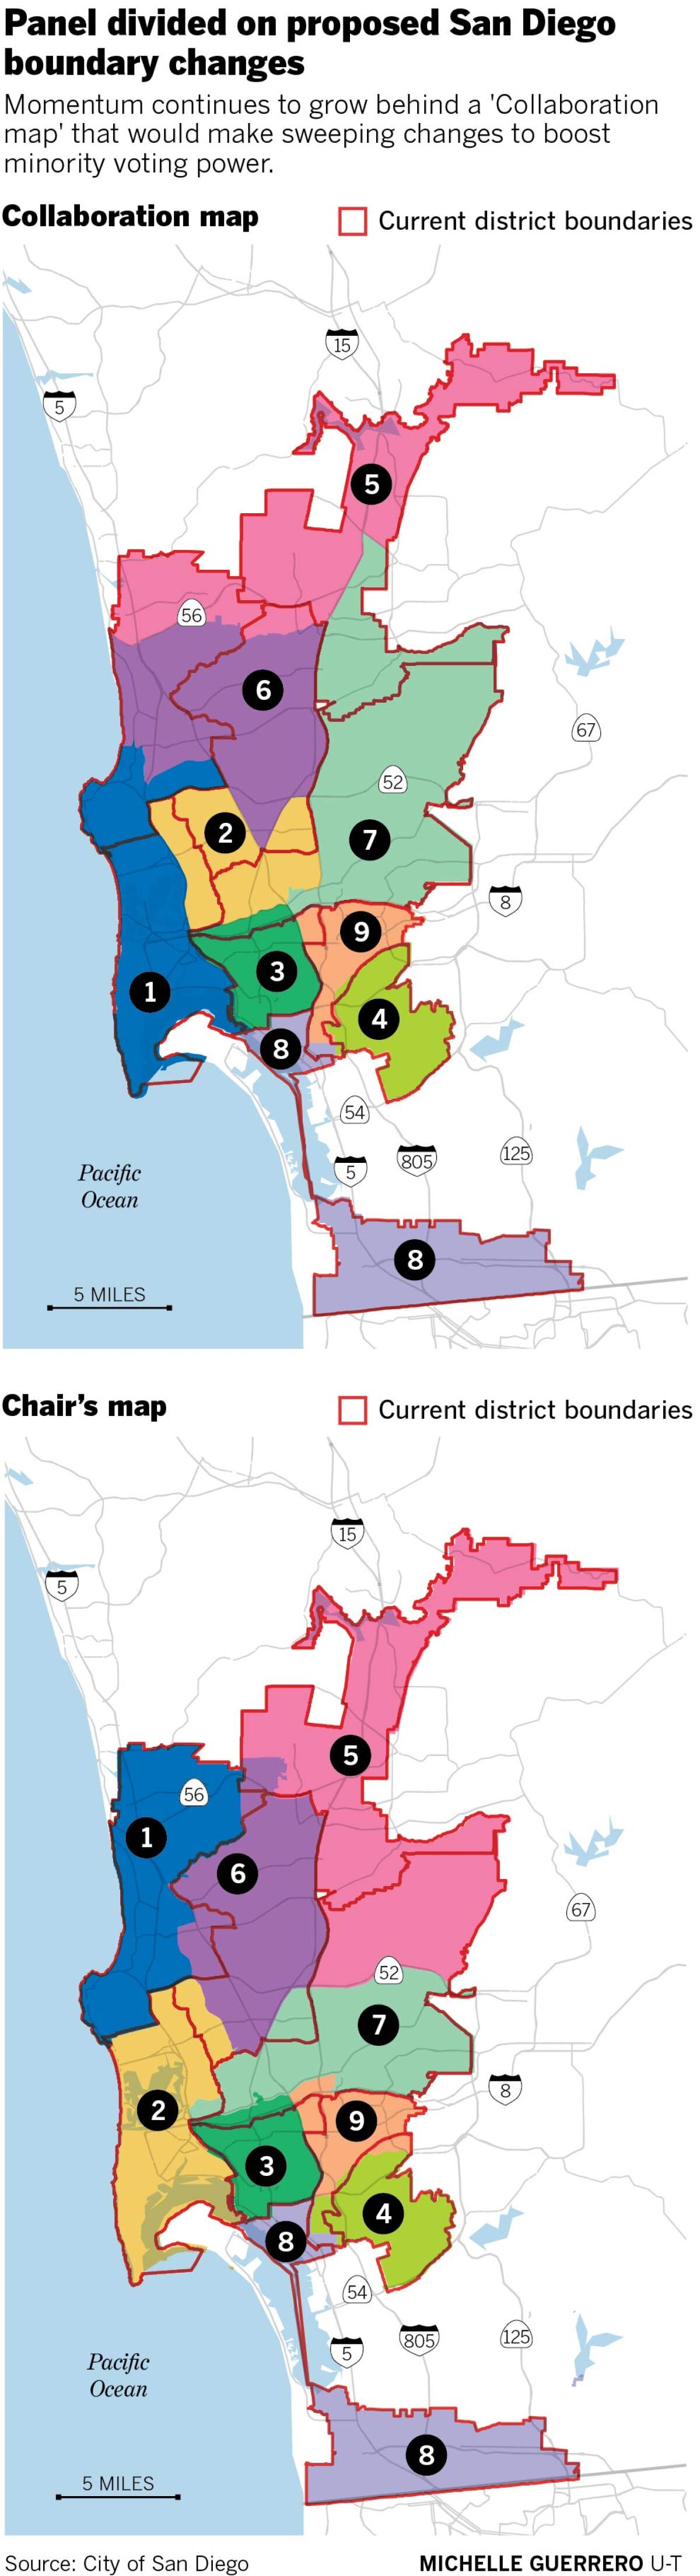 Panel divided on proposed San Diego boundary changes